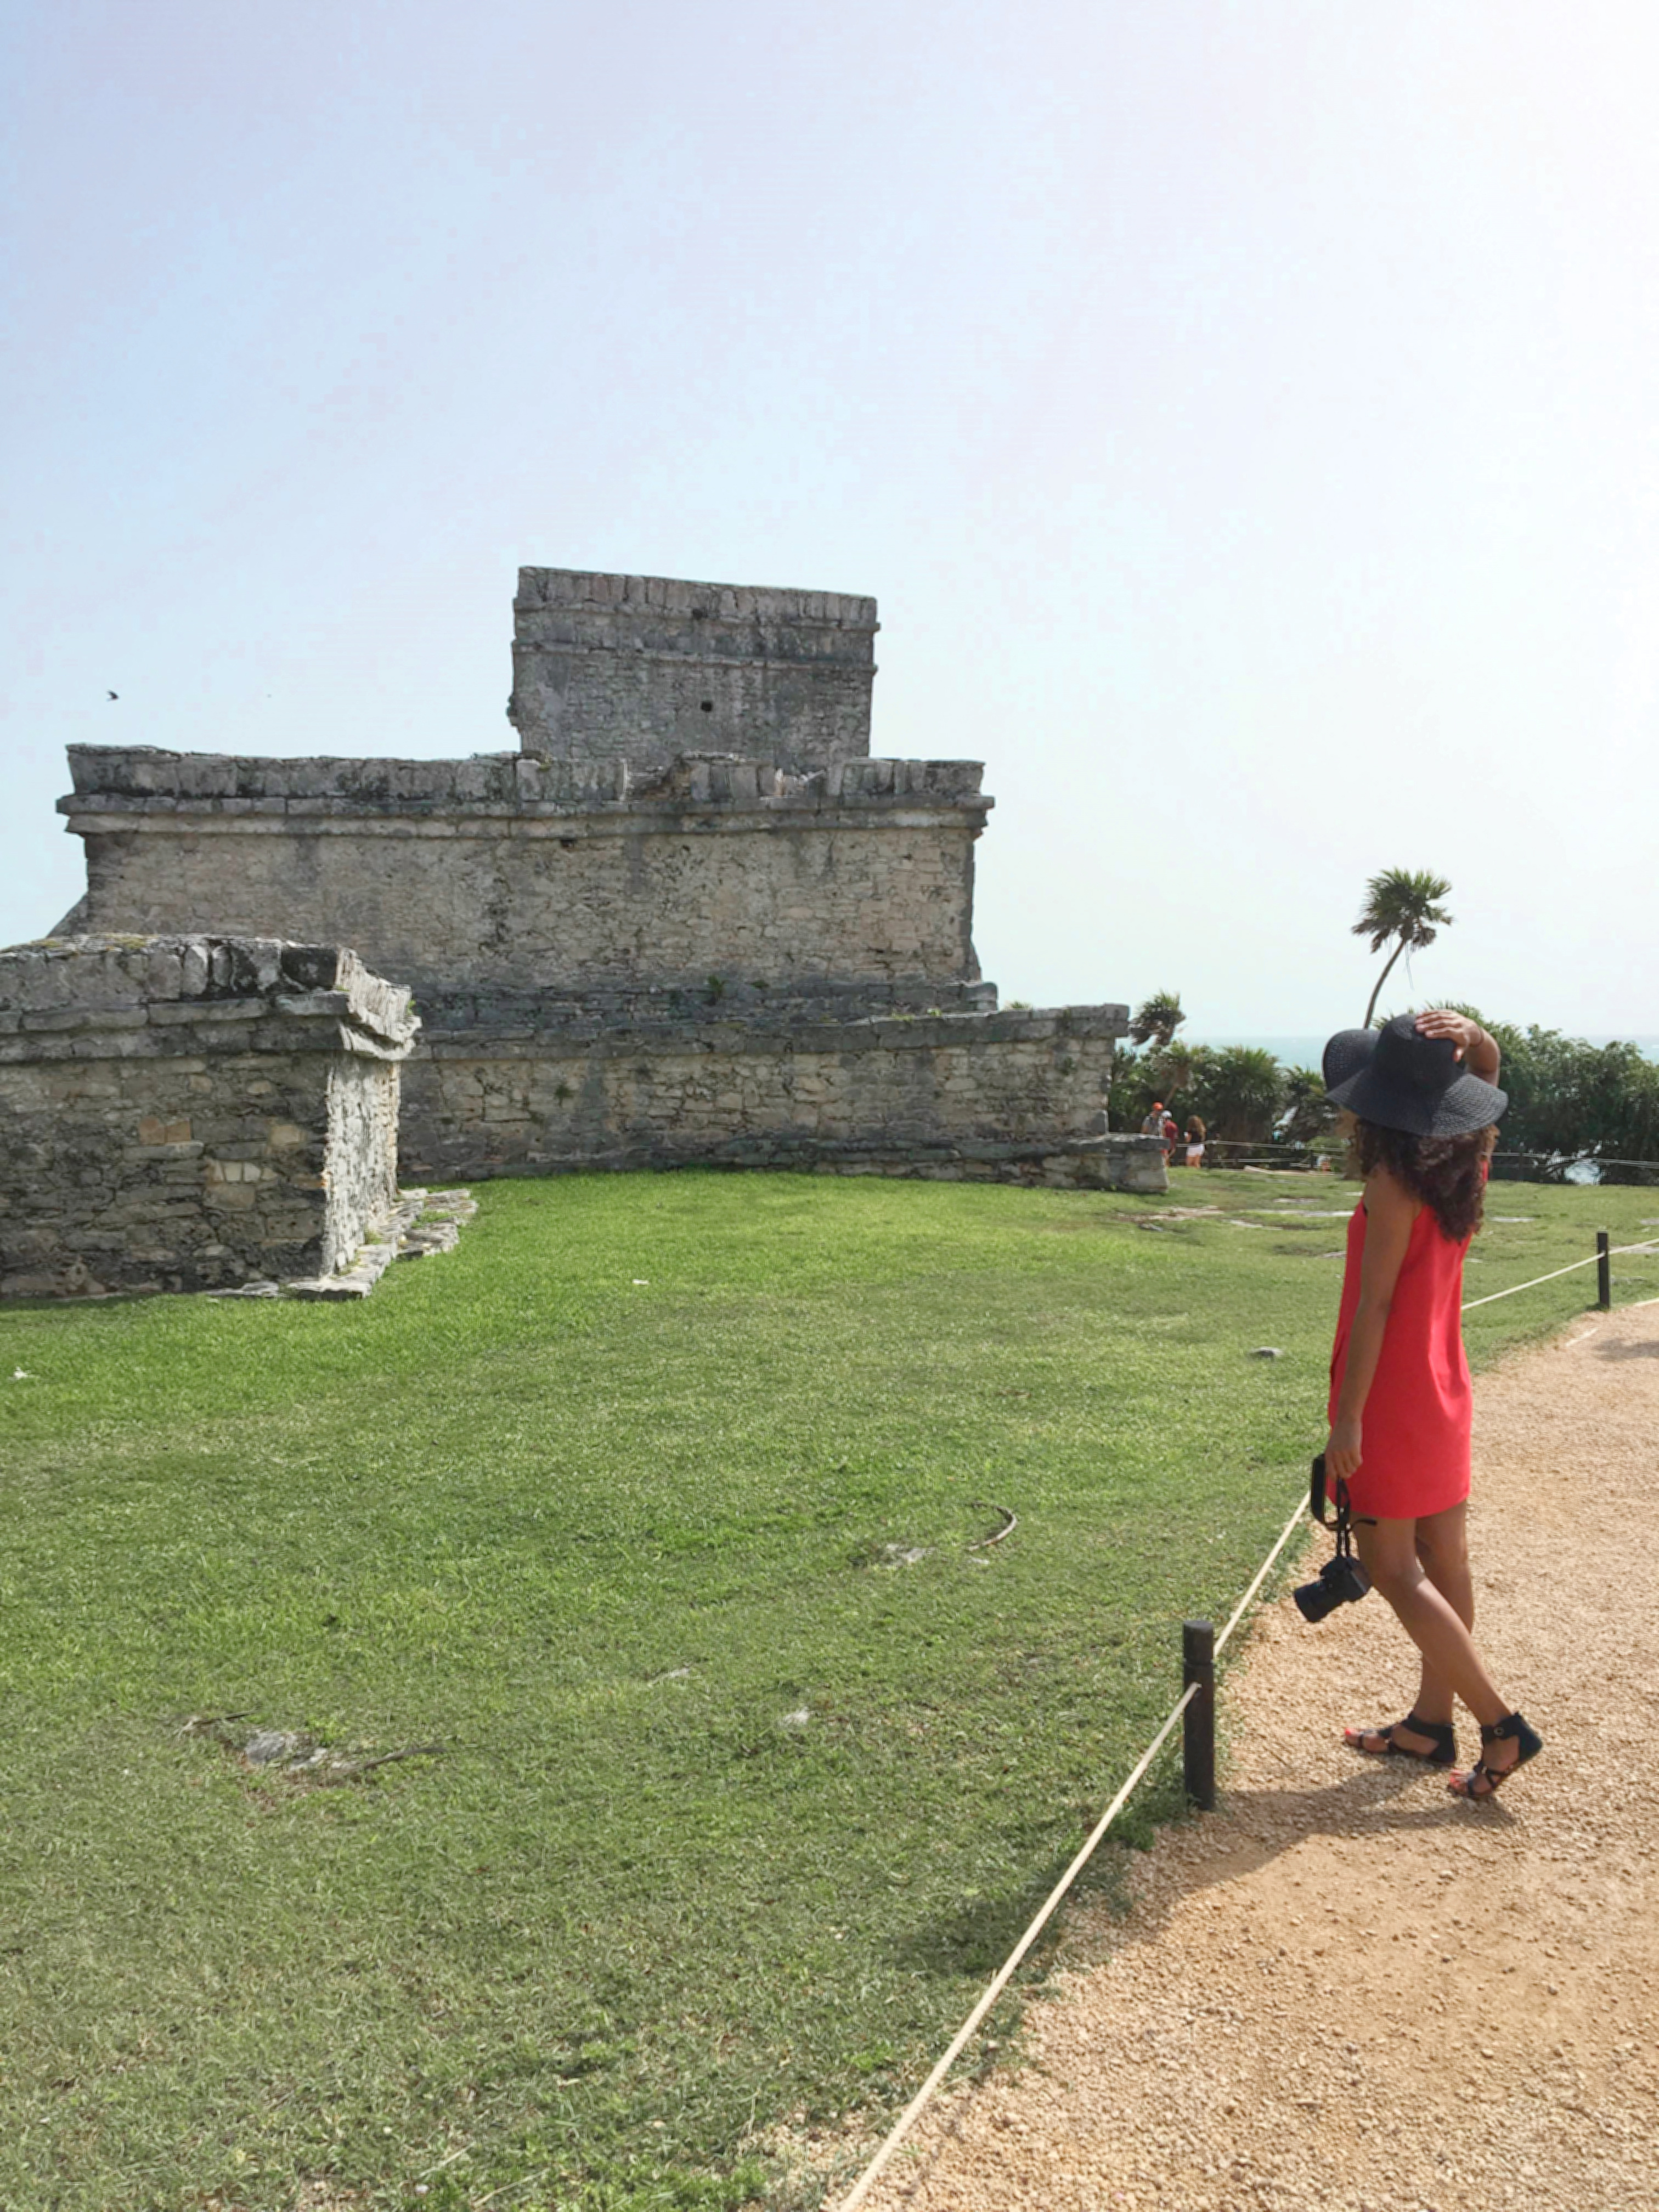 Standing with a camera at the Tulum Ruins in Mexico